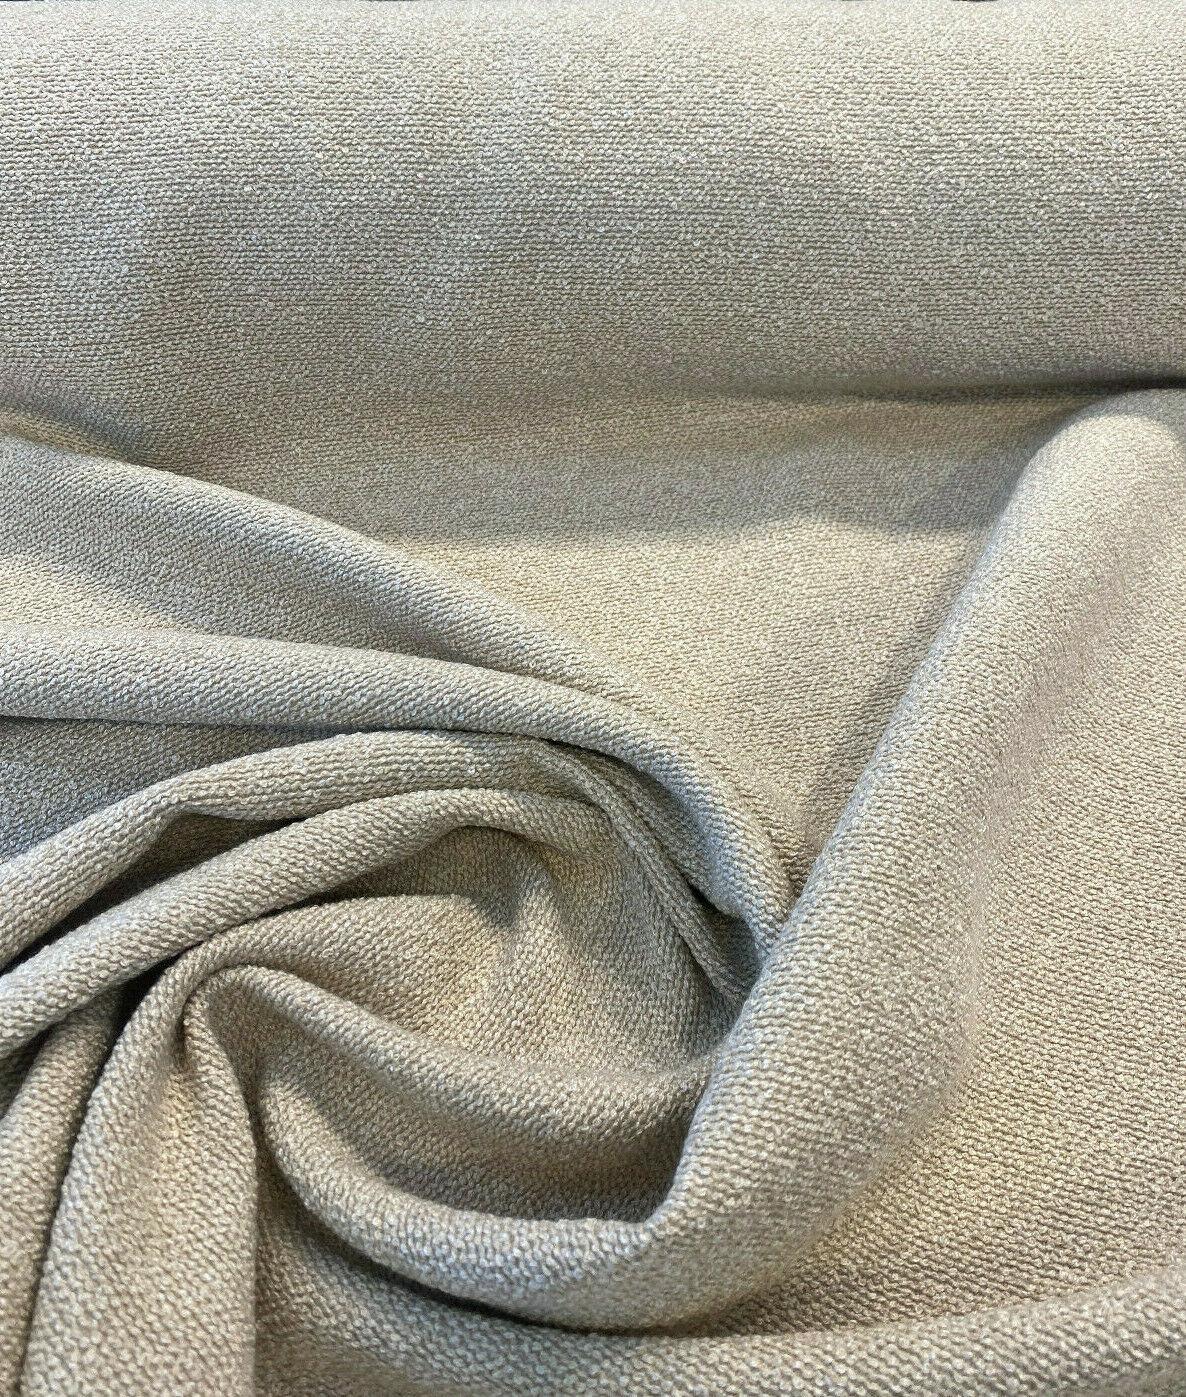 Many Sunbrella Outdoor Boucle Twist Beige Upholstery Fabric By the yard  Sunbrella X Options Available